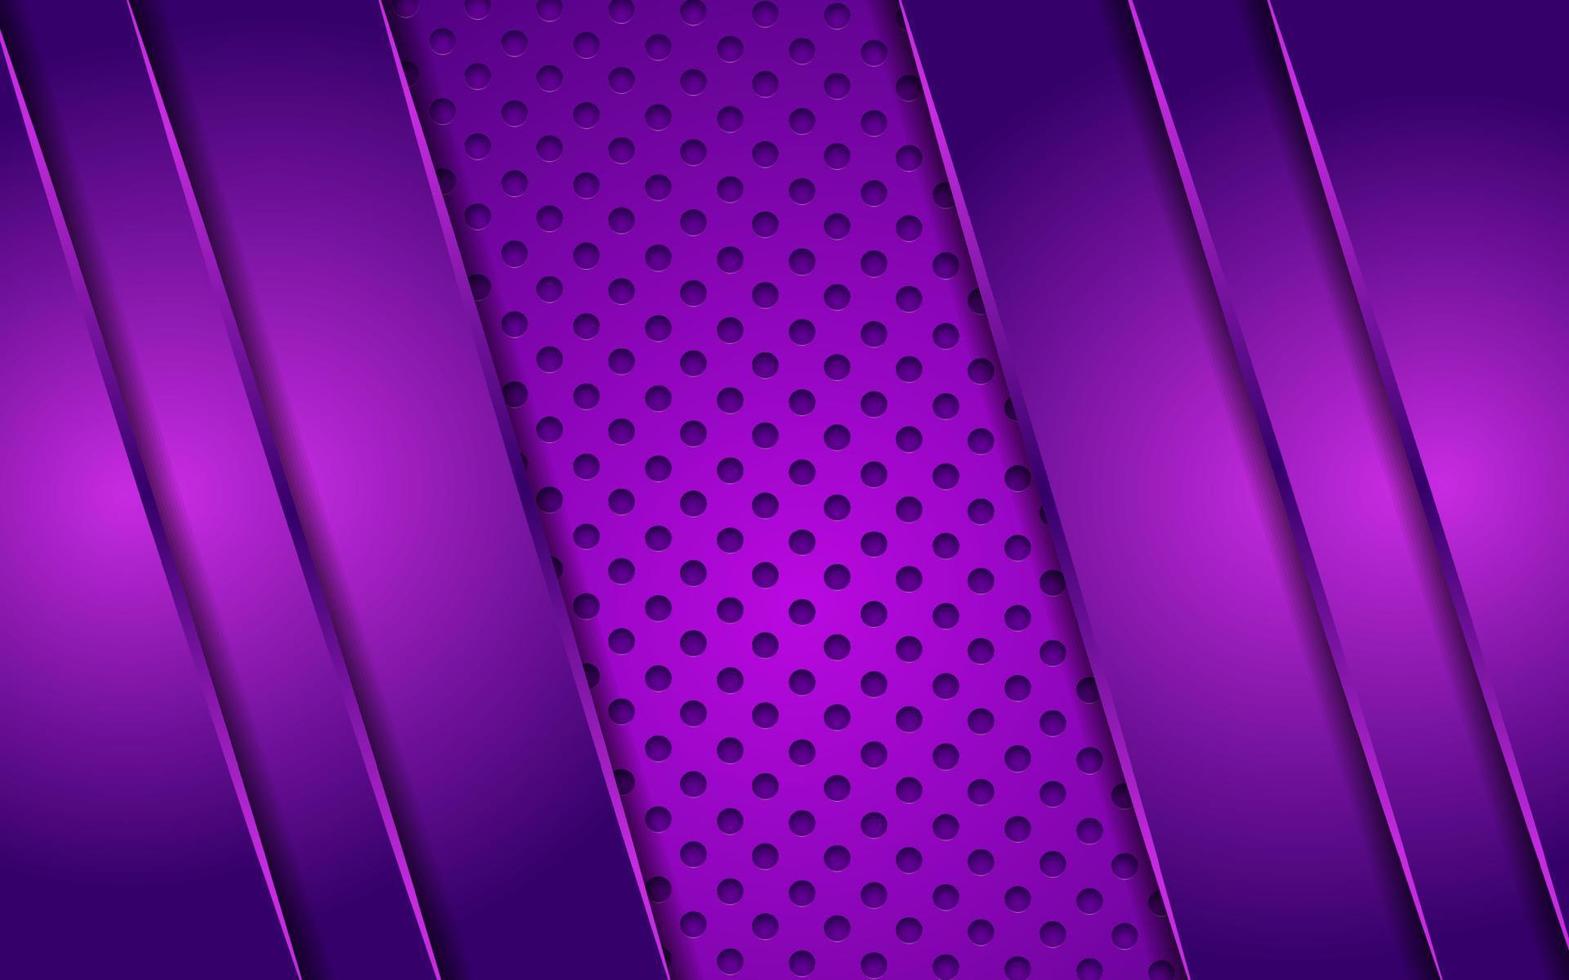 Abstract futuristic dark purple background with shiny lines vector